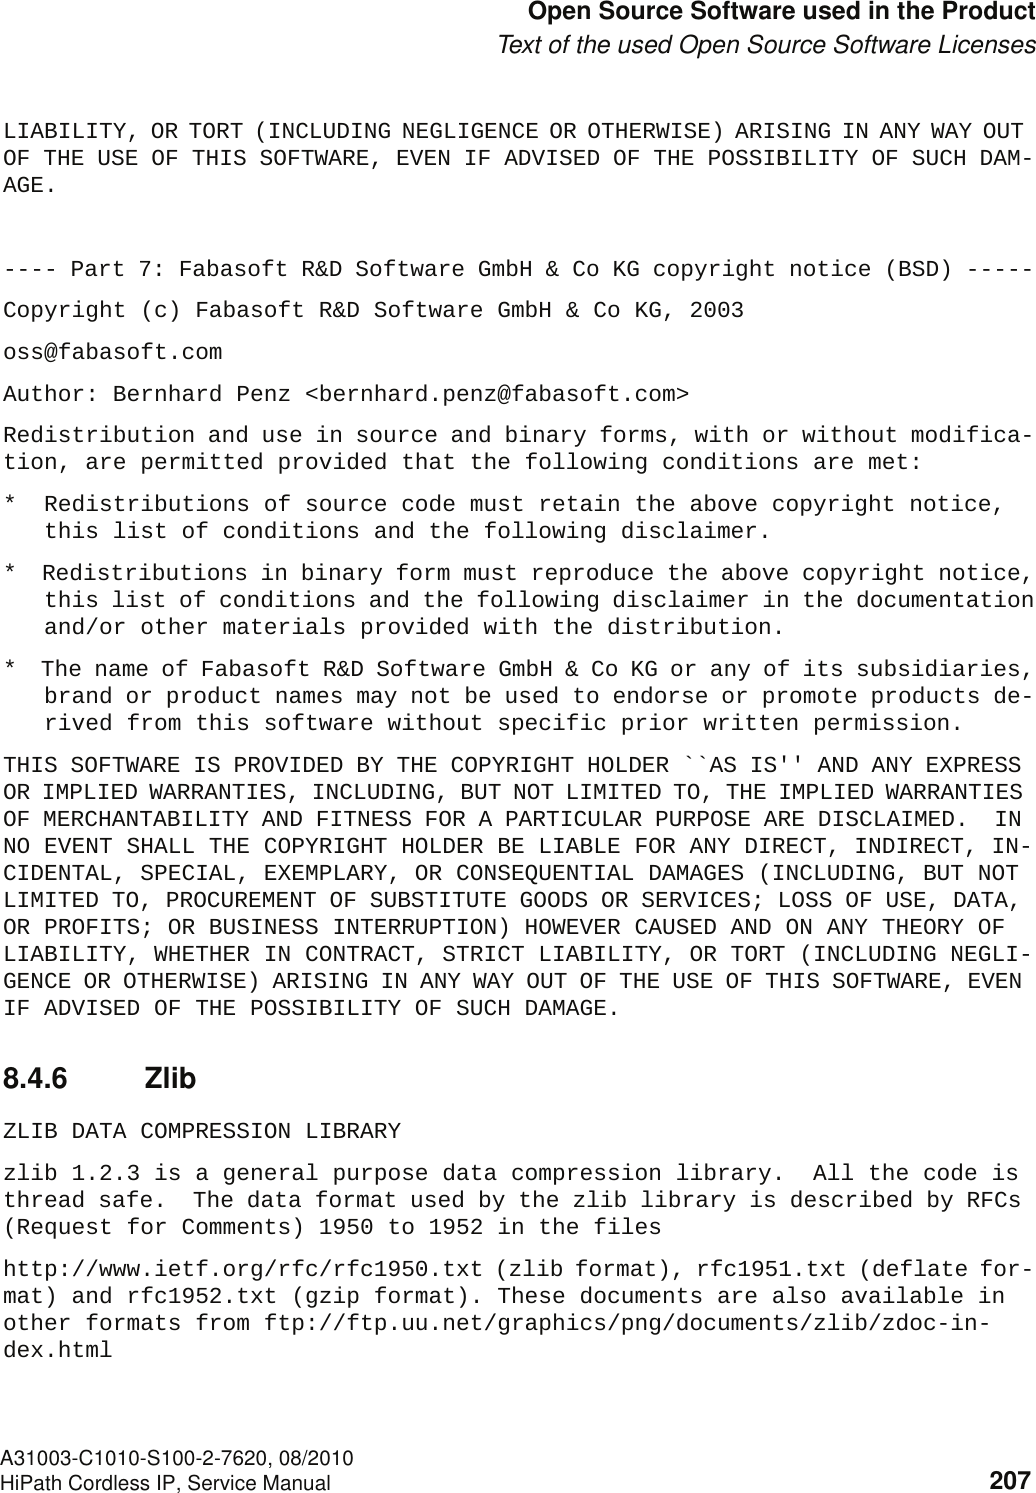 c08.fmA31003-C1010-S100-2-7620, 08/2010HiPath Cordless IP, Service Manual 207            Nur für den internen Gebrauch Open Source Software used in the ProductText of the used Open Source Software LicensesLIABILITY, OR TORT (INCLUDING NEGLIGENCE OR OTHERWISE) ARISING IN ANY WAY OUT OF THE USE OF THIS SOFTWARE, EVEN IF ADVISED OF THE POSSIBILITY OF SUCH DAM-AGE.---- Part 7: Fabasoft R&amp;D Software GmbH &amp; Co KG copyright notice (BSD) -----Copyright (c) Fabasoft R&amp;D Software GmbH &amp; Co KG, 2003oss@fabasoft.comAuthor: Bernhard Penz &lt;bernhard.penz@fabasoft.com&gt;Redistribution and use in source and binary forms, with or without modifica-tion, are permitted provided that the following conditions are met:*  Redistributions of source code must retain the above copyright notice,this list of conditions and the following disclaimer.*  Redistributions in binary form must reproduce the above copyright notice,this list of conditions and the following disclaimer in the documentationand/or other materials provided with the distribution.*  The name of Fabasoft R&amp;D Software GmbH &amp; Co KG or any of its subsidiaries,brand or product names may not be used to endorse or promote products de-rived from this software without specific prior written permission.THIS SOFTWARE IS PROVIDED BY THE COPYRIGHT HOLDER ``AS IS&apos;&apos; AND ANY EXPRESS OR IMPLIED WARRANTIES, INCLUDING, BUT NOT LIMITED TO, THE IMPLIED WARRANTIES OF MERCHANTABILITY AND FITNESS FOR A PARTICULAR PURPOSE ARE DISCLAIMED.  IN NO EVENT SHALL THE COPYRIGHT HOLDER BE LIABLE FOR ANY DIRECT, INDIRECT, IN-CIDENTAL, SPECIAL, EXEMPLARY, OR CONSEQUENTIAL DAMAGES (INCLUDING, BUT NOT LIMITED TO, PROCUREMENT OF SUBSTITUTE GOODS OR SERVICES; LOSS OF USE, DATA, OR PROFITS; OR BUSINESS INTERRUPTION) HOWEVER CAUSED AND ON ANY THEORY OF LIABILITY, WHETHER IN CONTRACT, STRICT LIABILITY, OR TORT (INCLUDING NEGLI-GENCE OR OTHERWISE) ARISING IN ANY WAY OUT OF THE USE OF THIS SOFTWARE, EVEN IF ADVISED OF THE POSSIBILITY OF SUCH DAMAGE.8.4.6 ZlibZLIB DATA COMPRESSION LIBRARYzlib 1.2.3 is a general purpose data compression library.  All the code is thread safe.  The data format used by the zlib library is described by RFCs (Request for Comments) 1950 to 1952 in the fileshttp://www.ietf.org/rfc/rfc1950.txt (zlib format), rfc1951.txt (deflate for-mat) and rfc1952.txt (gzip format). These documents are also available in other formats from ftp://ftp.uu.net/graphics/png/documents/zlib/zdoc-in-dex.html